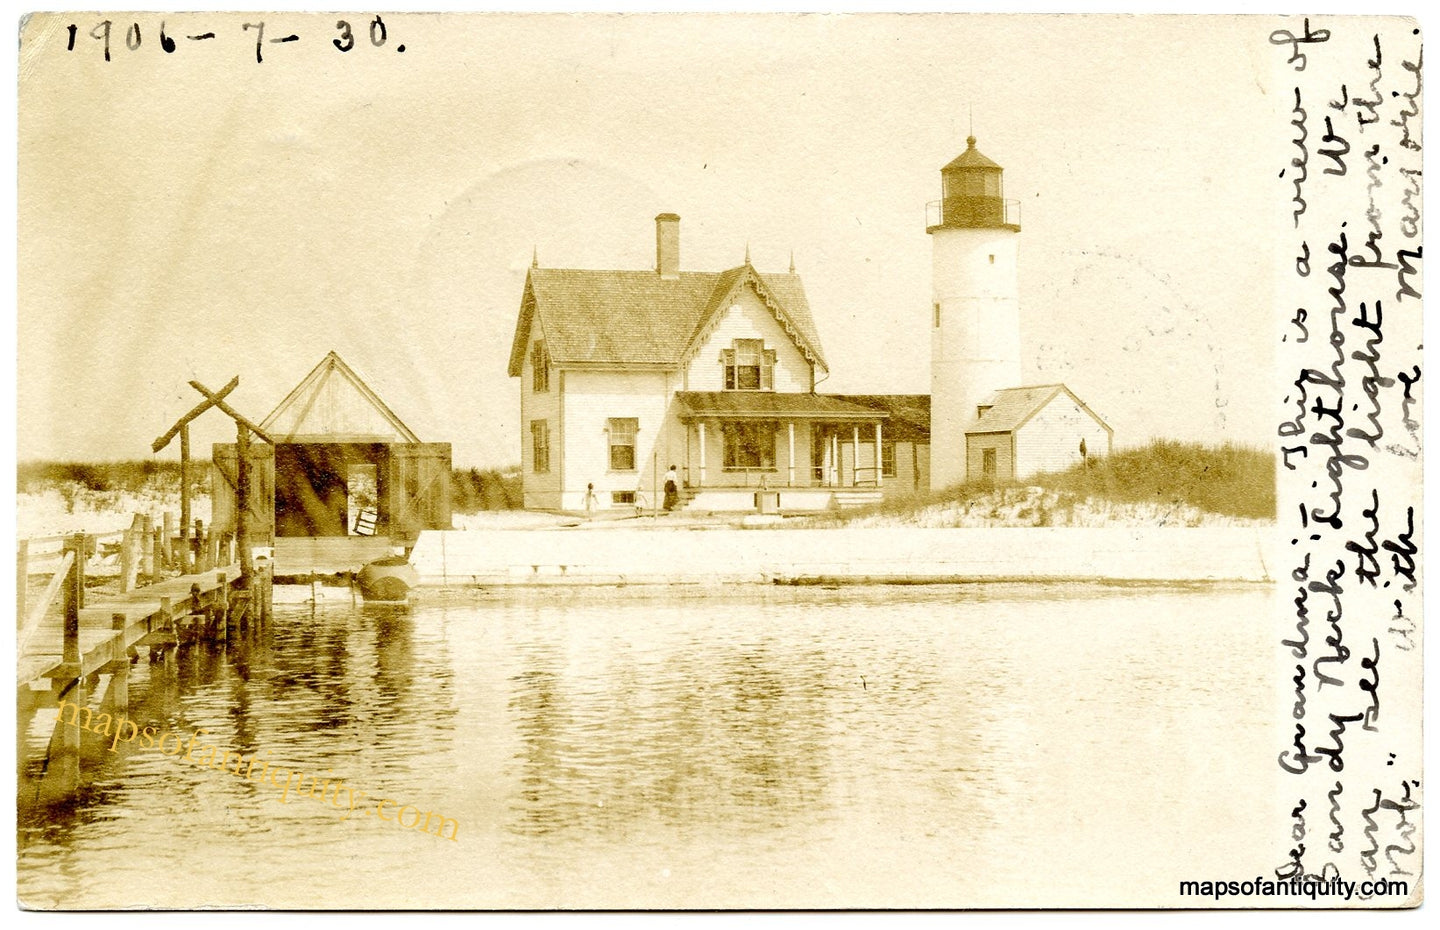 Black-&-white-real-photo-Sandy-Neck-Lighthouse-Barnstable-Mass---Postcard-**********-Antique-Postcards--1906-Real-Photo-Maps-Of-Antiquity